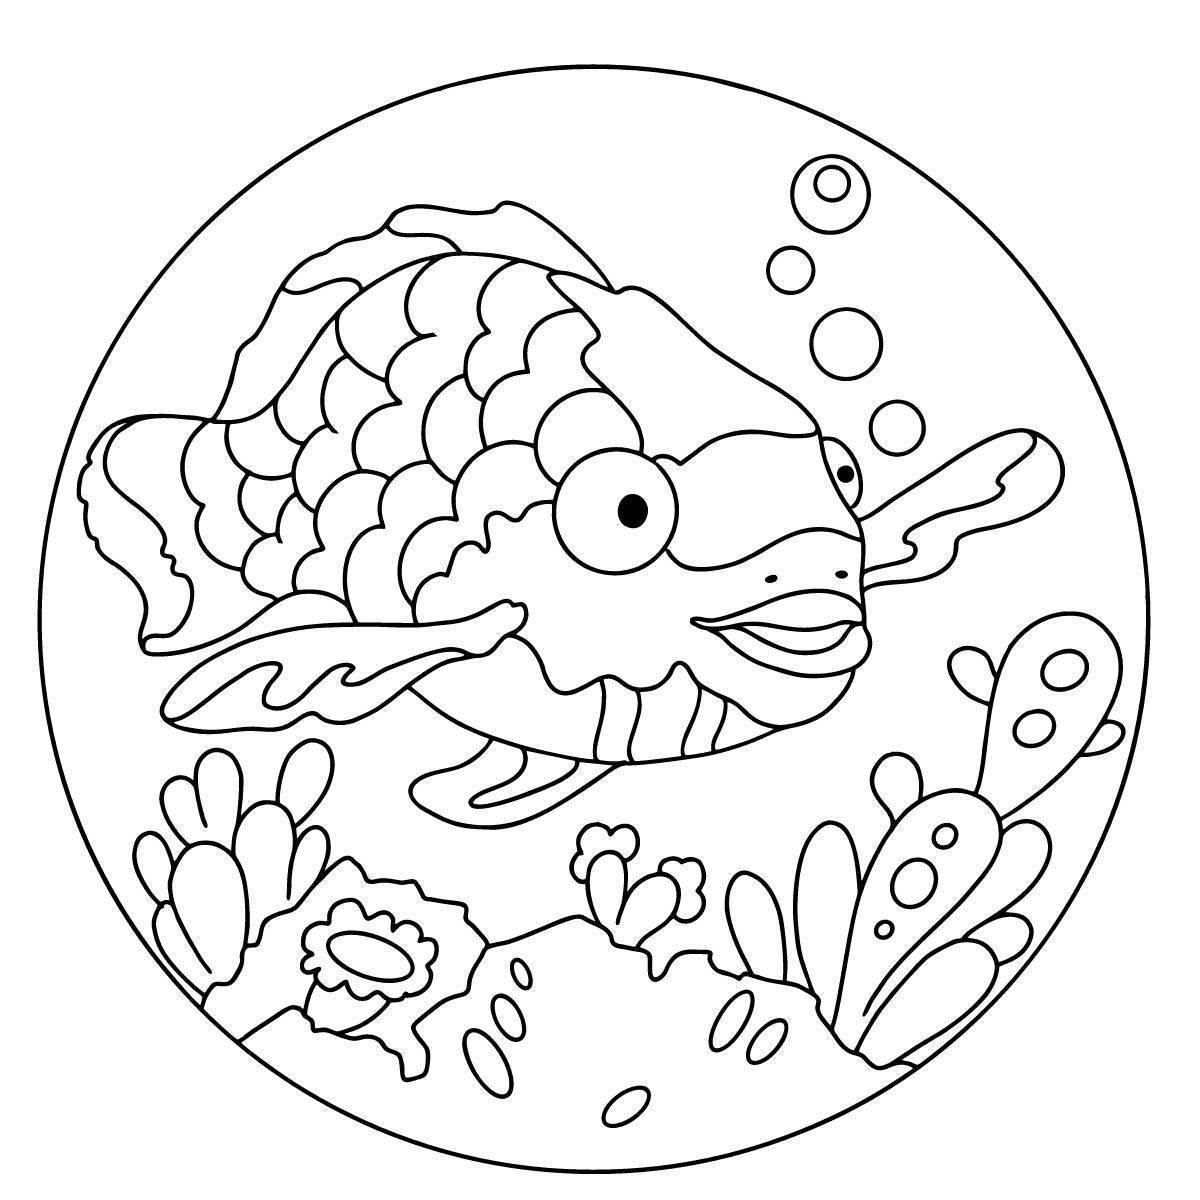 Bright fish coloring book for children 5-6 years old